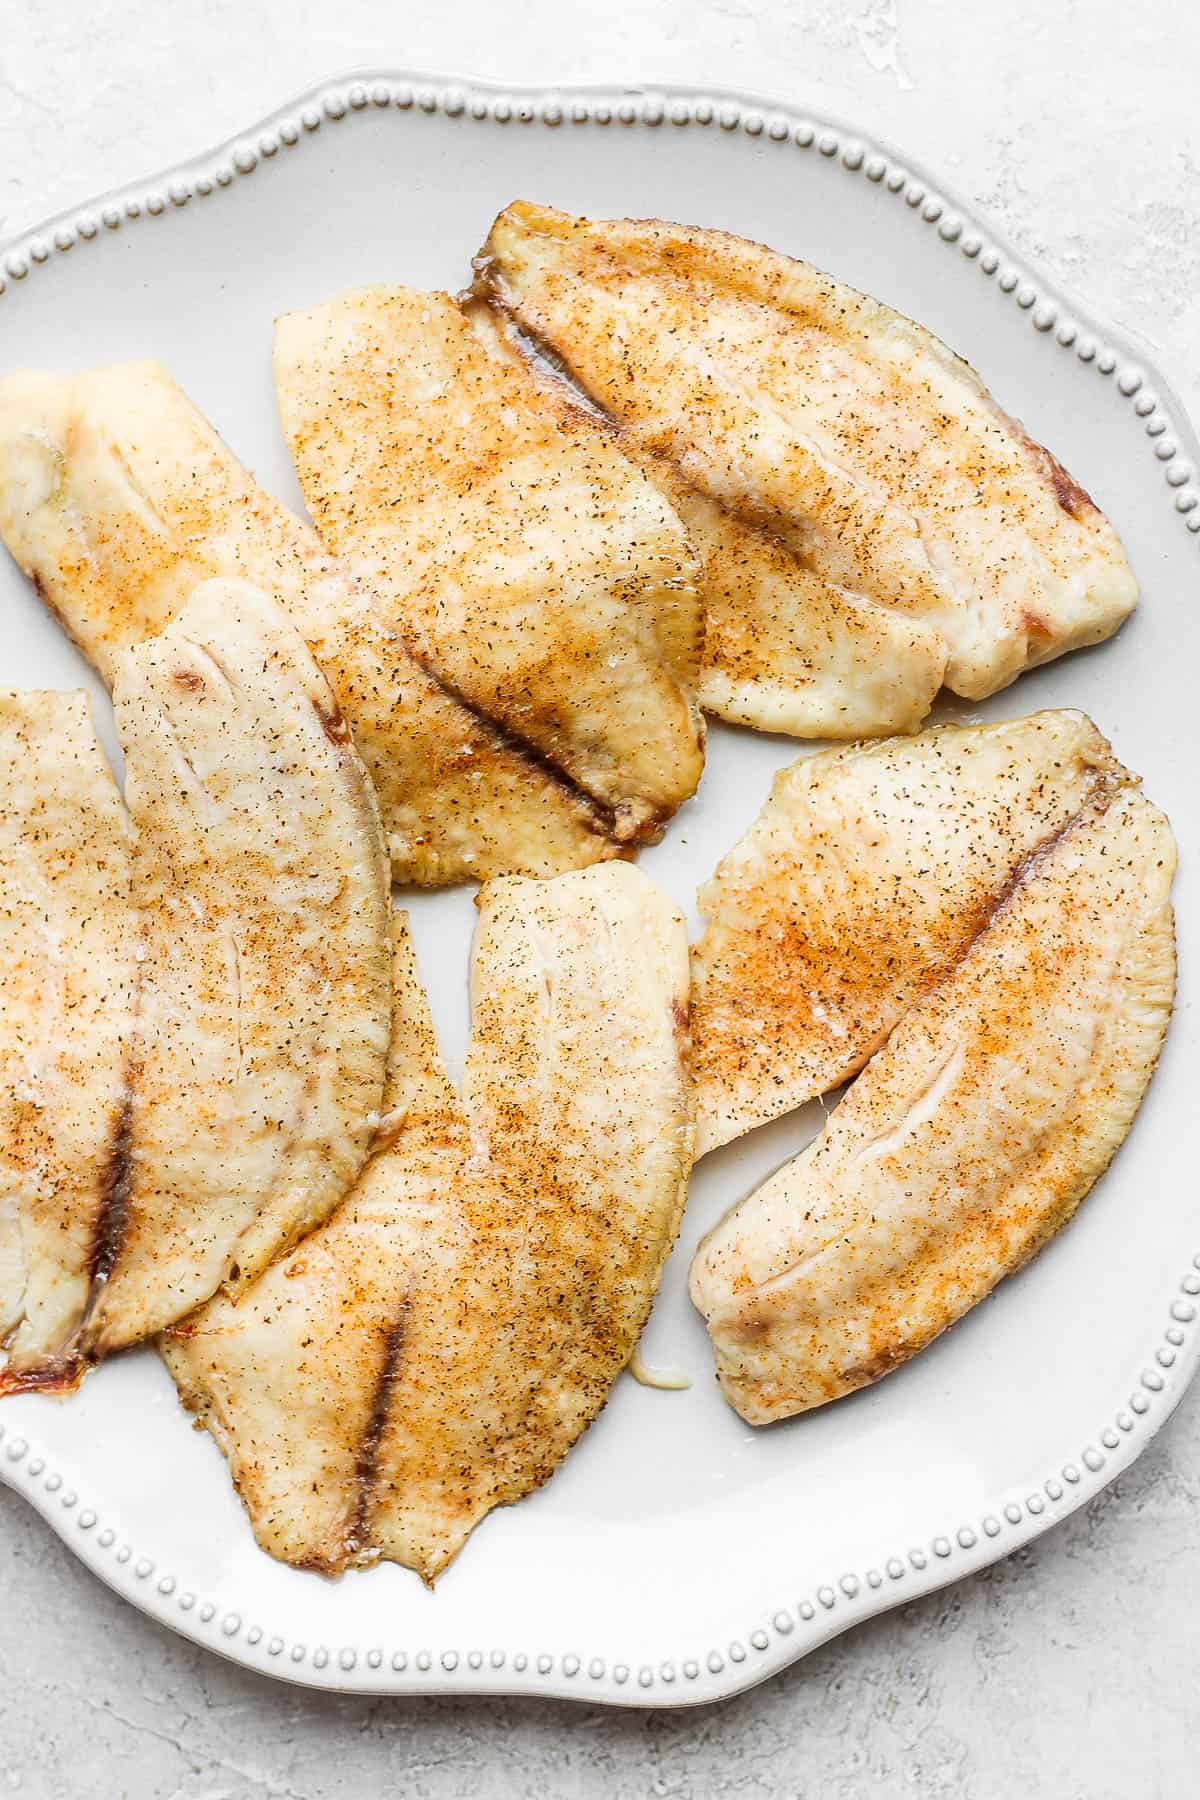 Baked tilapia fillets on a plate.